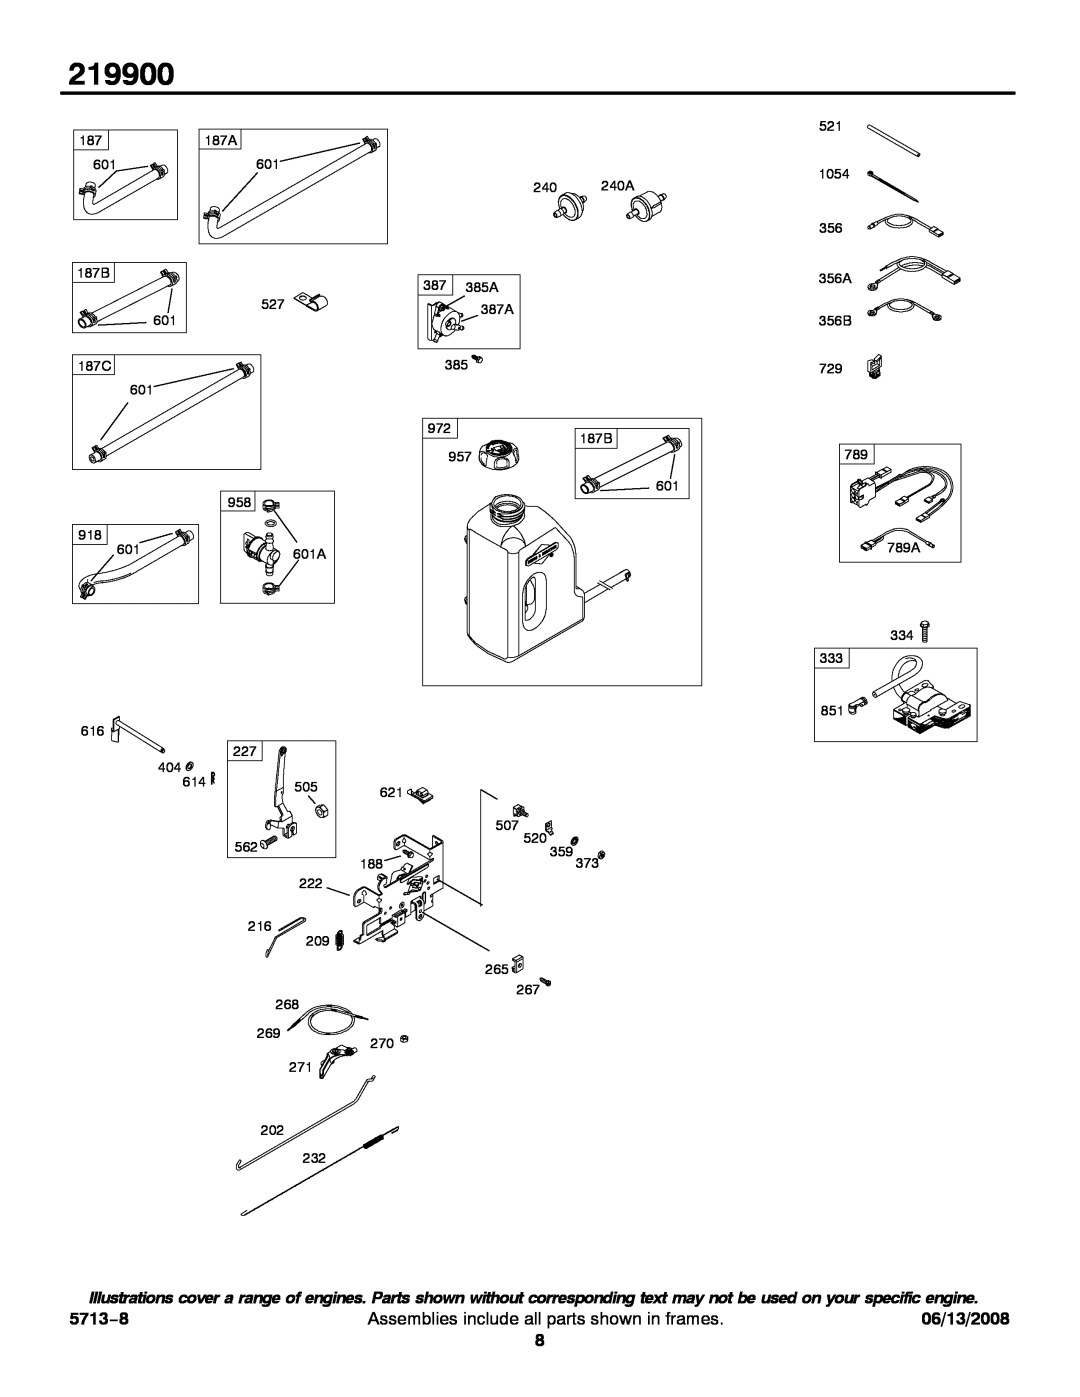 Snapper 219900 service manual 5713−8, Assemblies include all parts shown in frames, 06/13/2008 